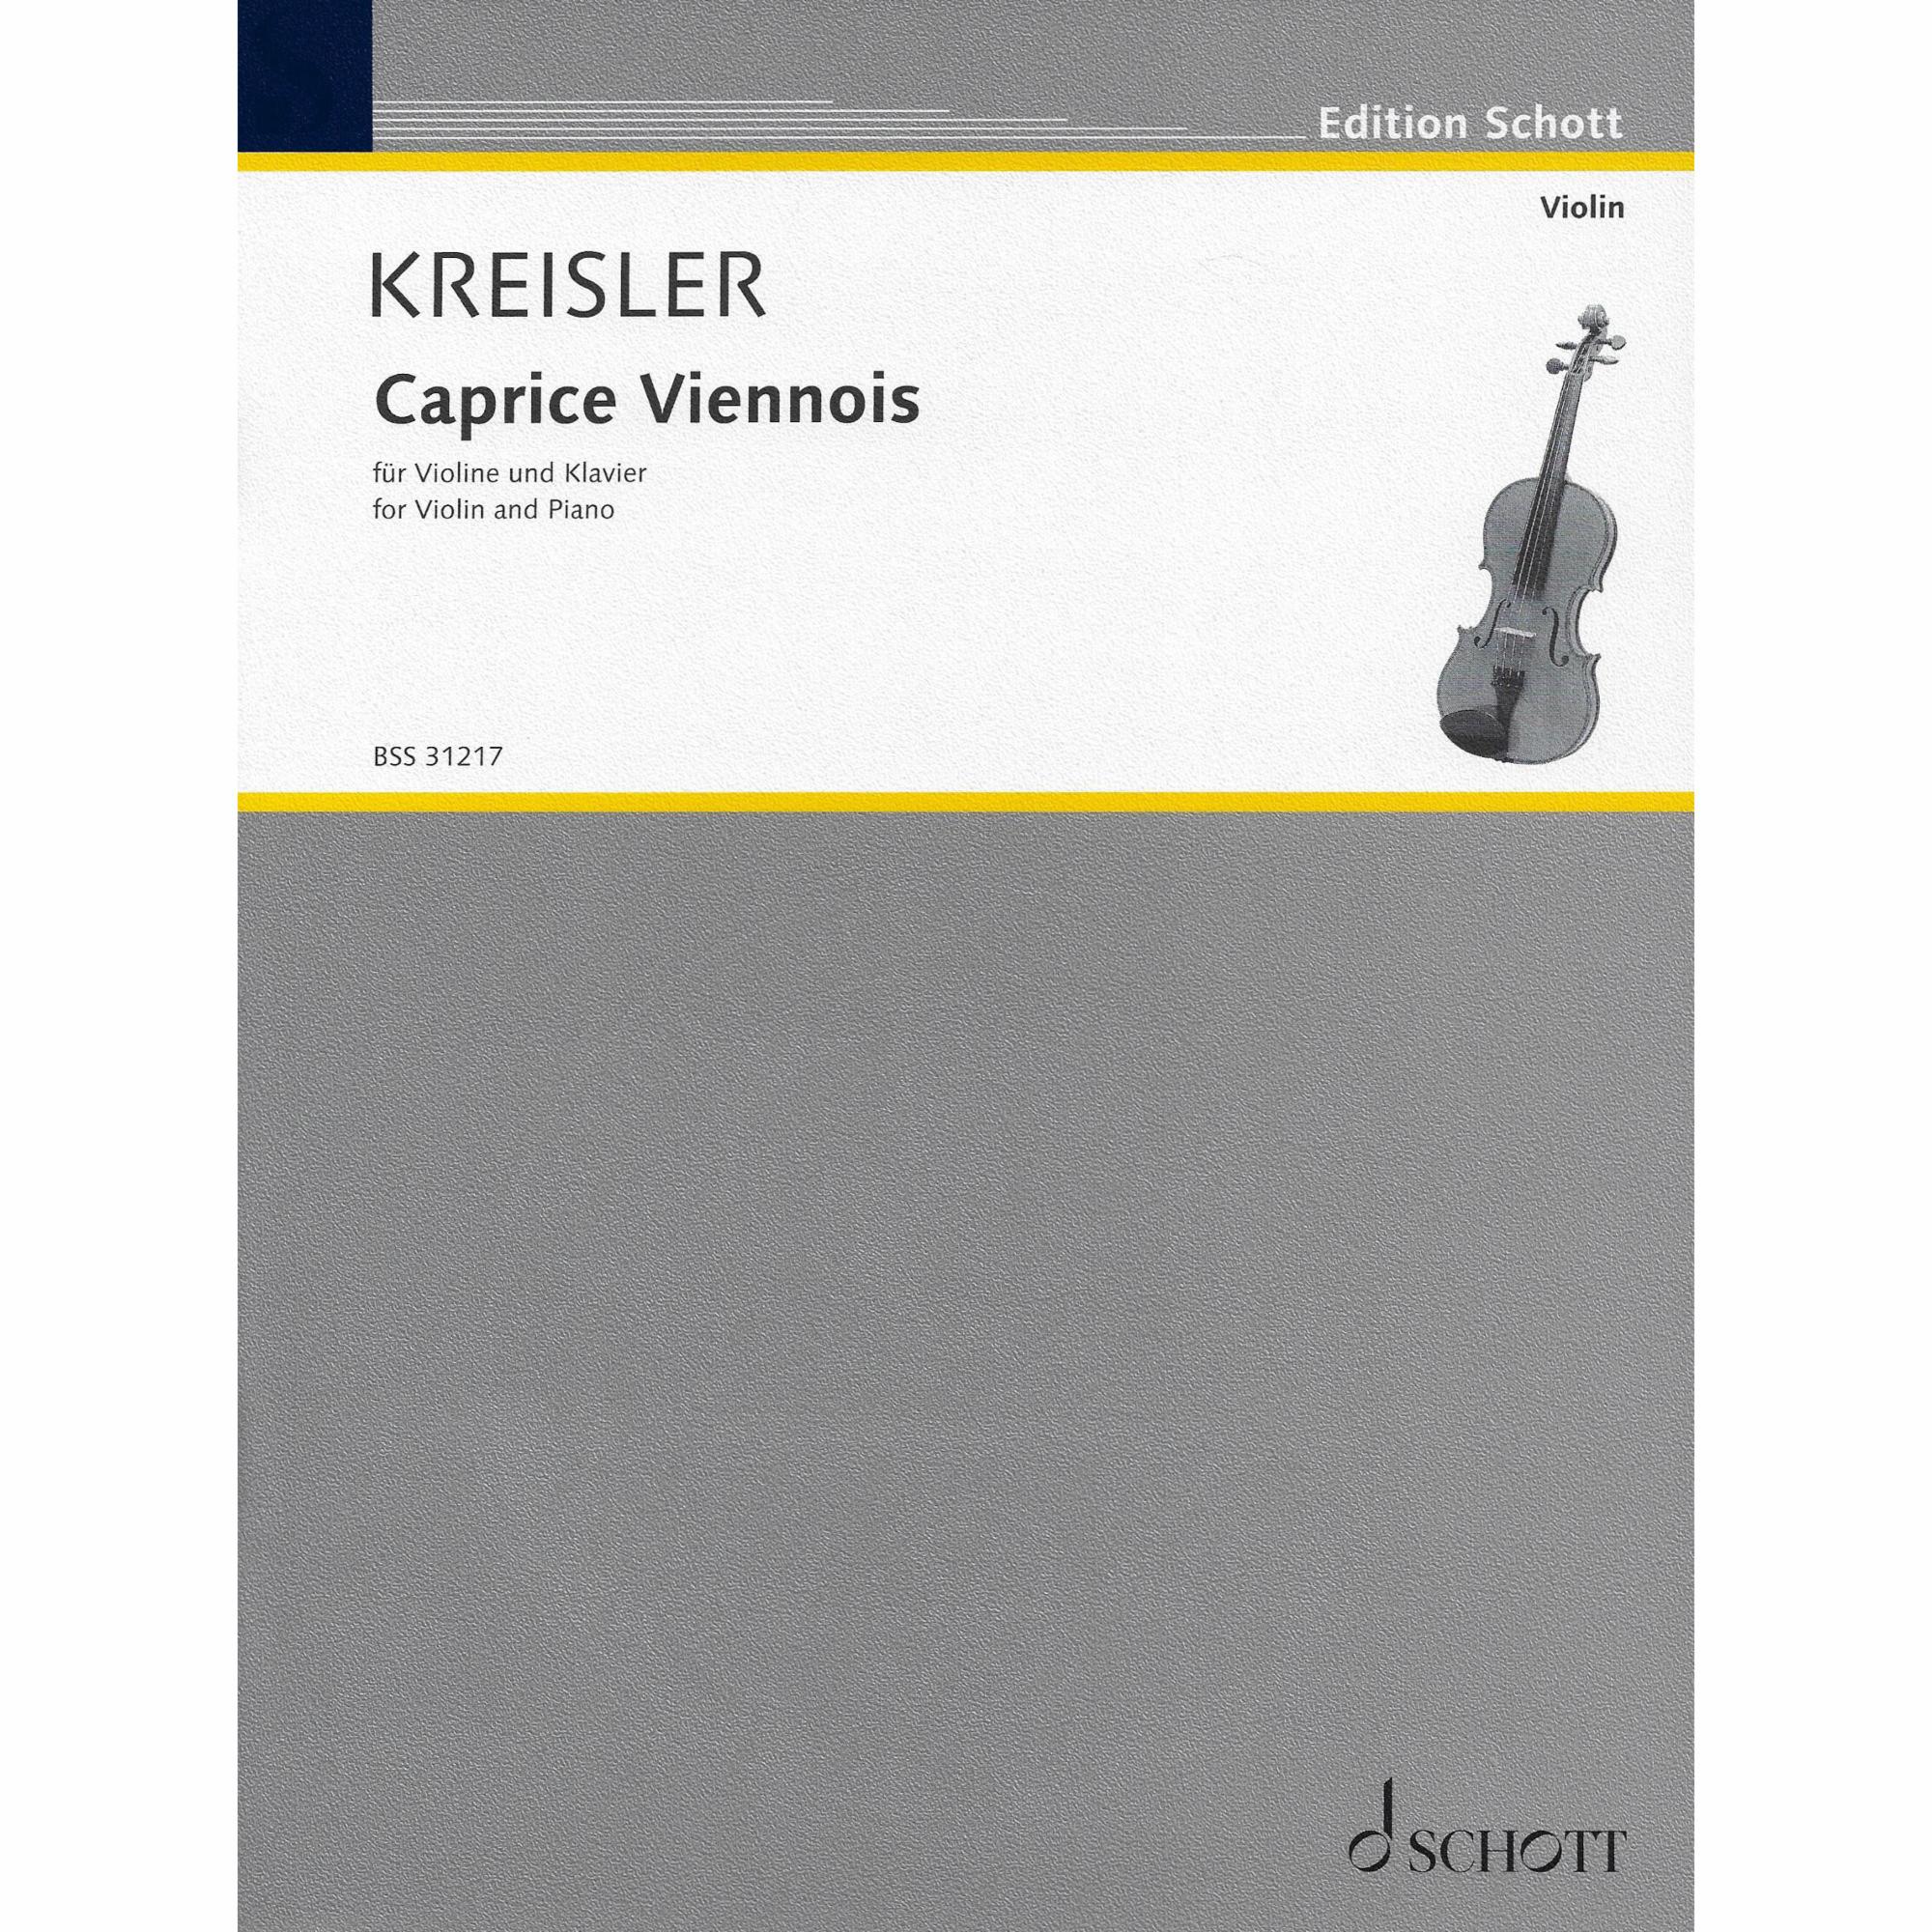 Kreisler -- Caprice Viennois for Violin and Piano